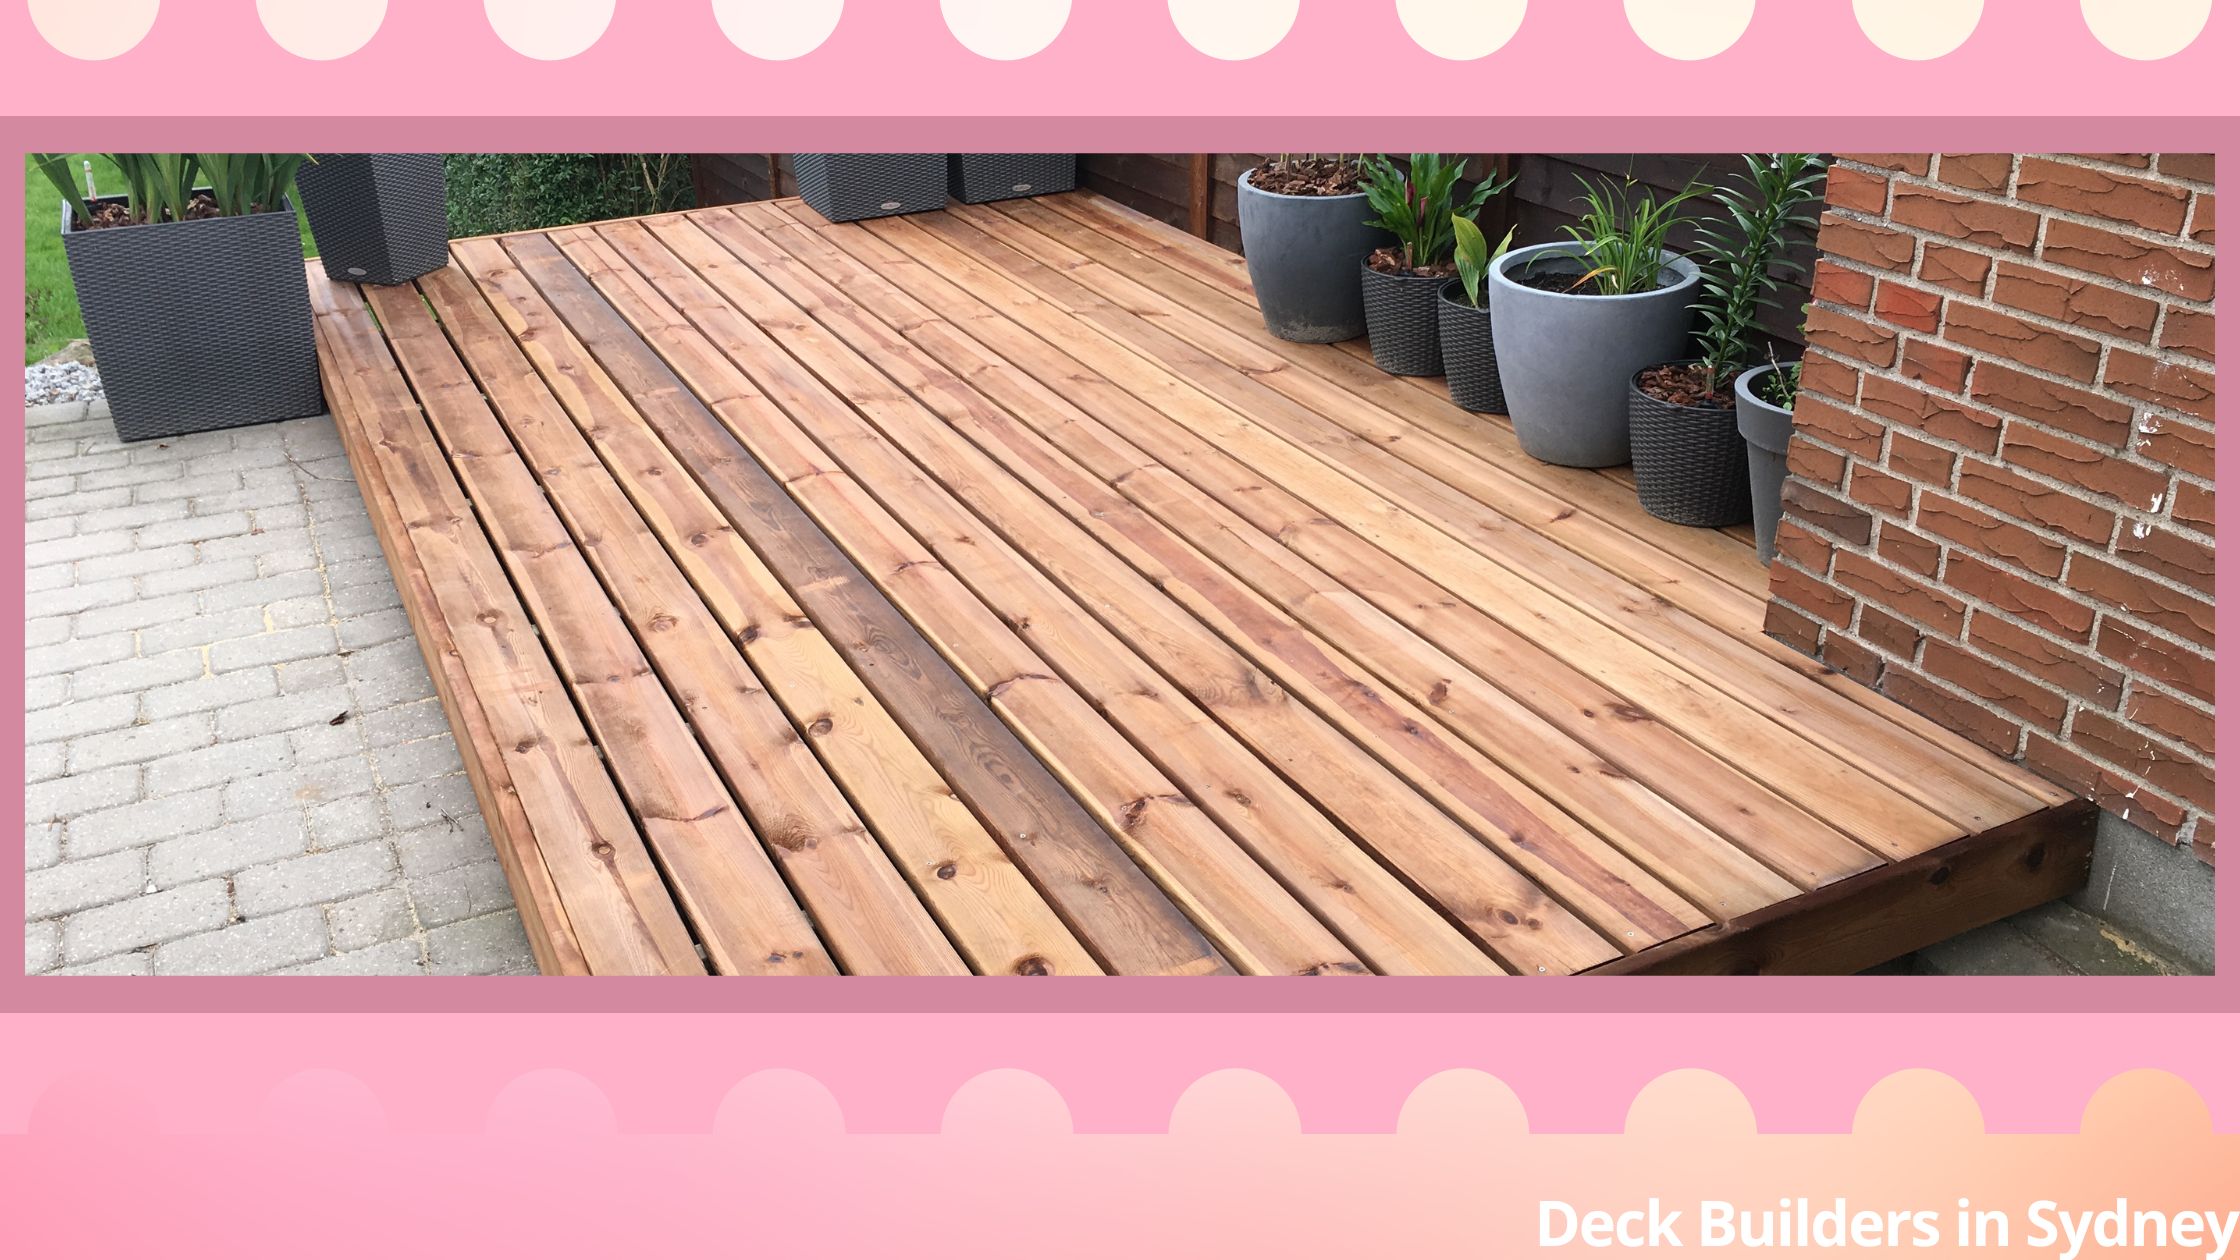 What Kind Of Benefits Can An Experienced Deck Builder Bring To Your Home?